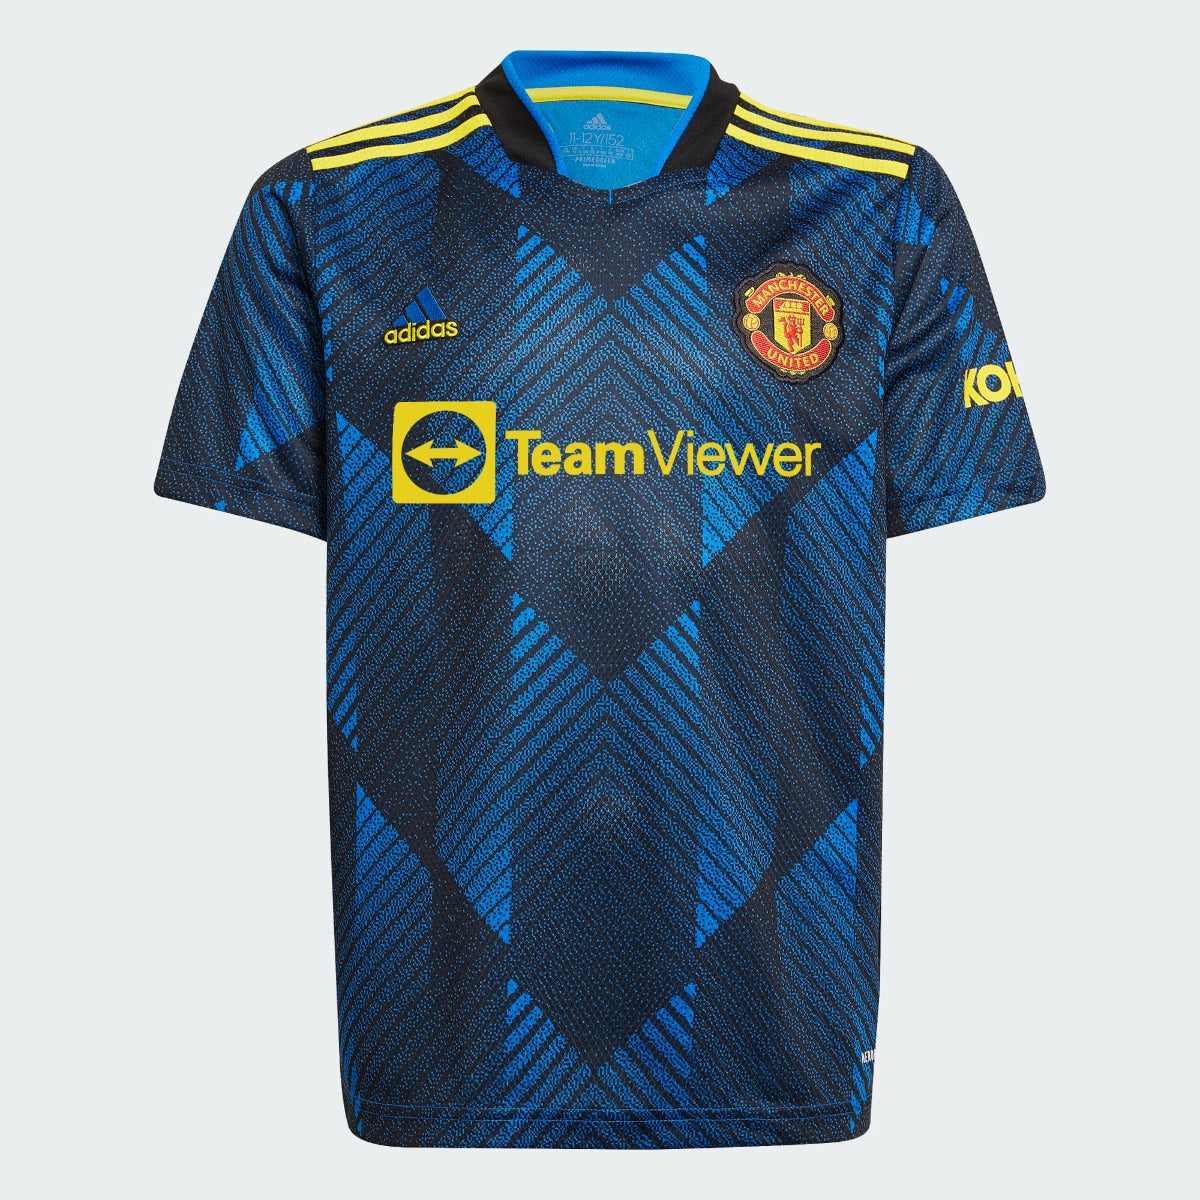 Adidas 2021-22 Manchester United Youth Third Jersey - Glow Blue-Yellow (Front)